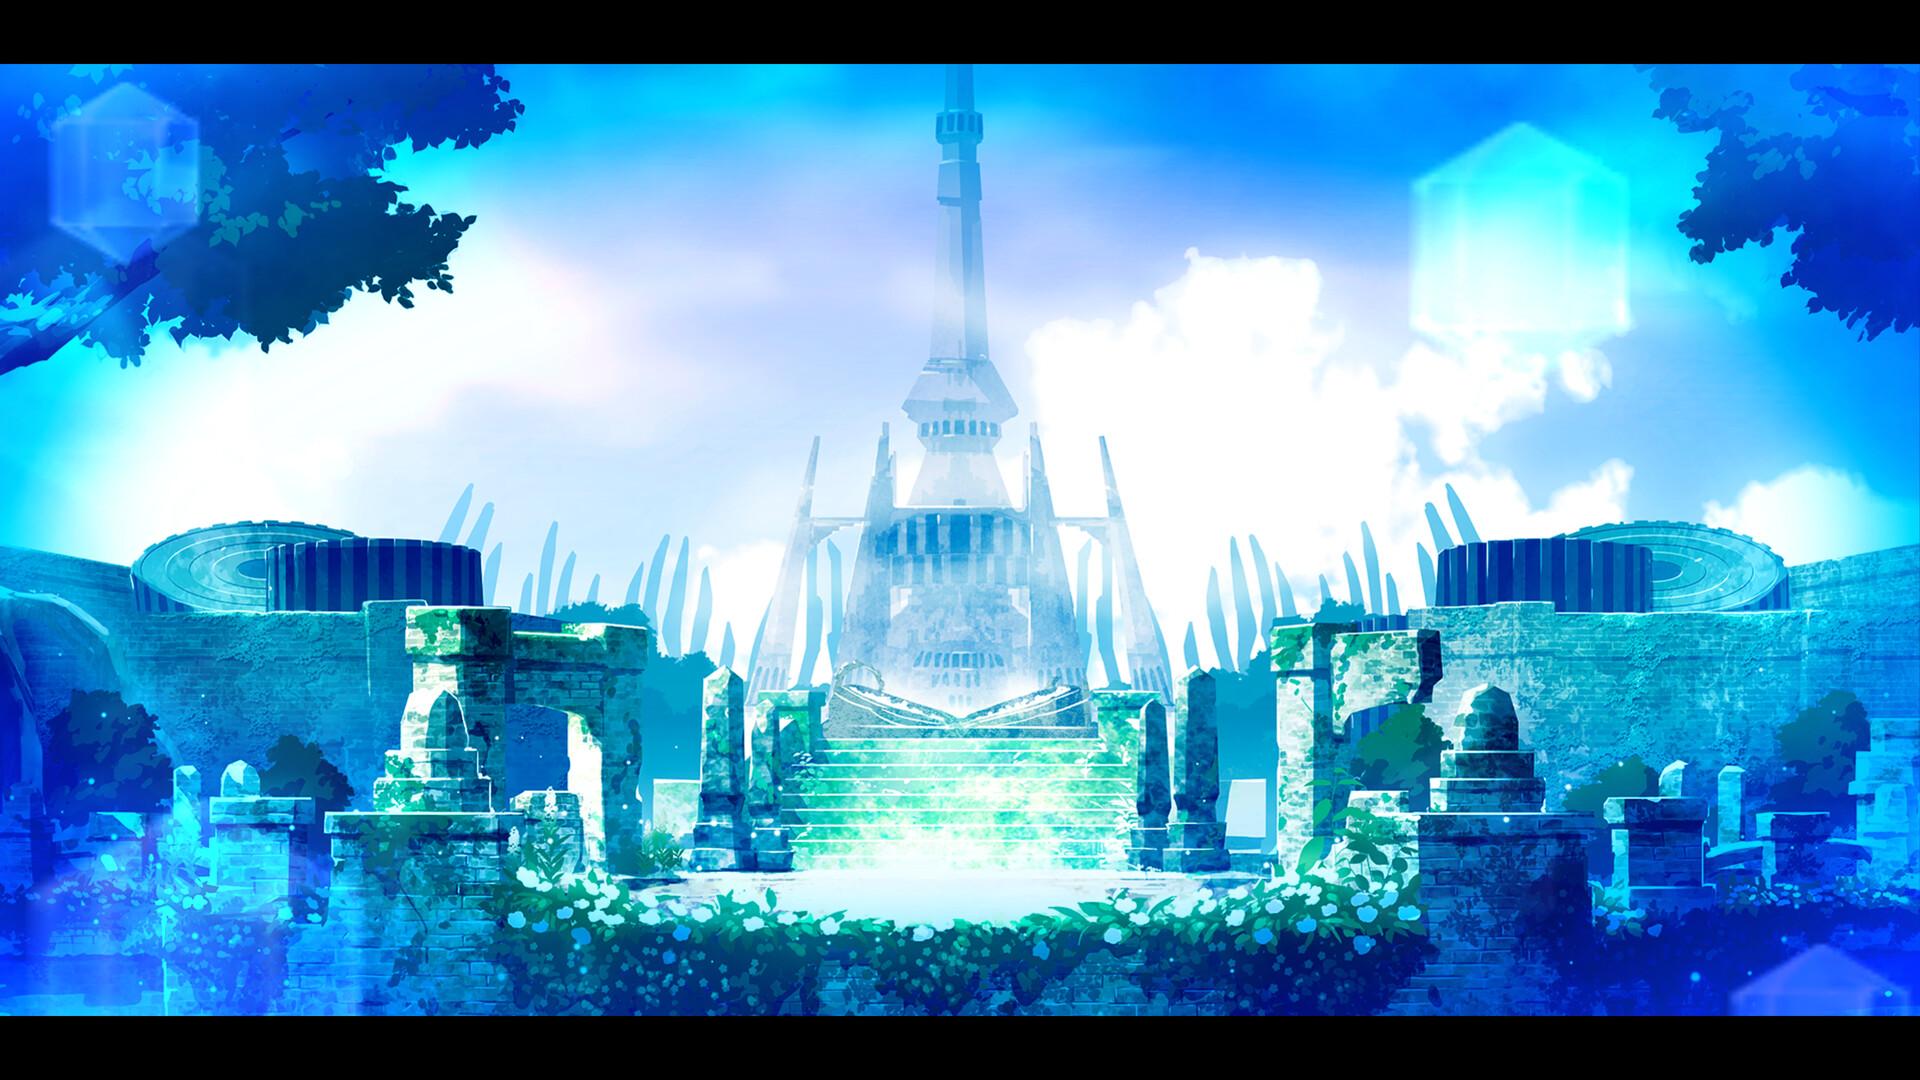 Screenshot №4 from game The Legend of Nayuta: Boundless Trails